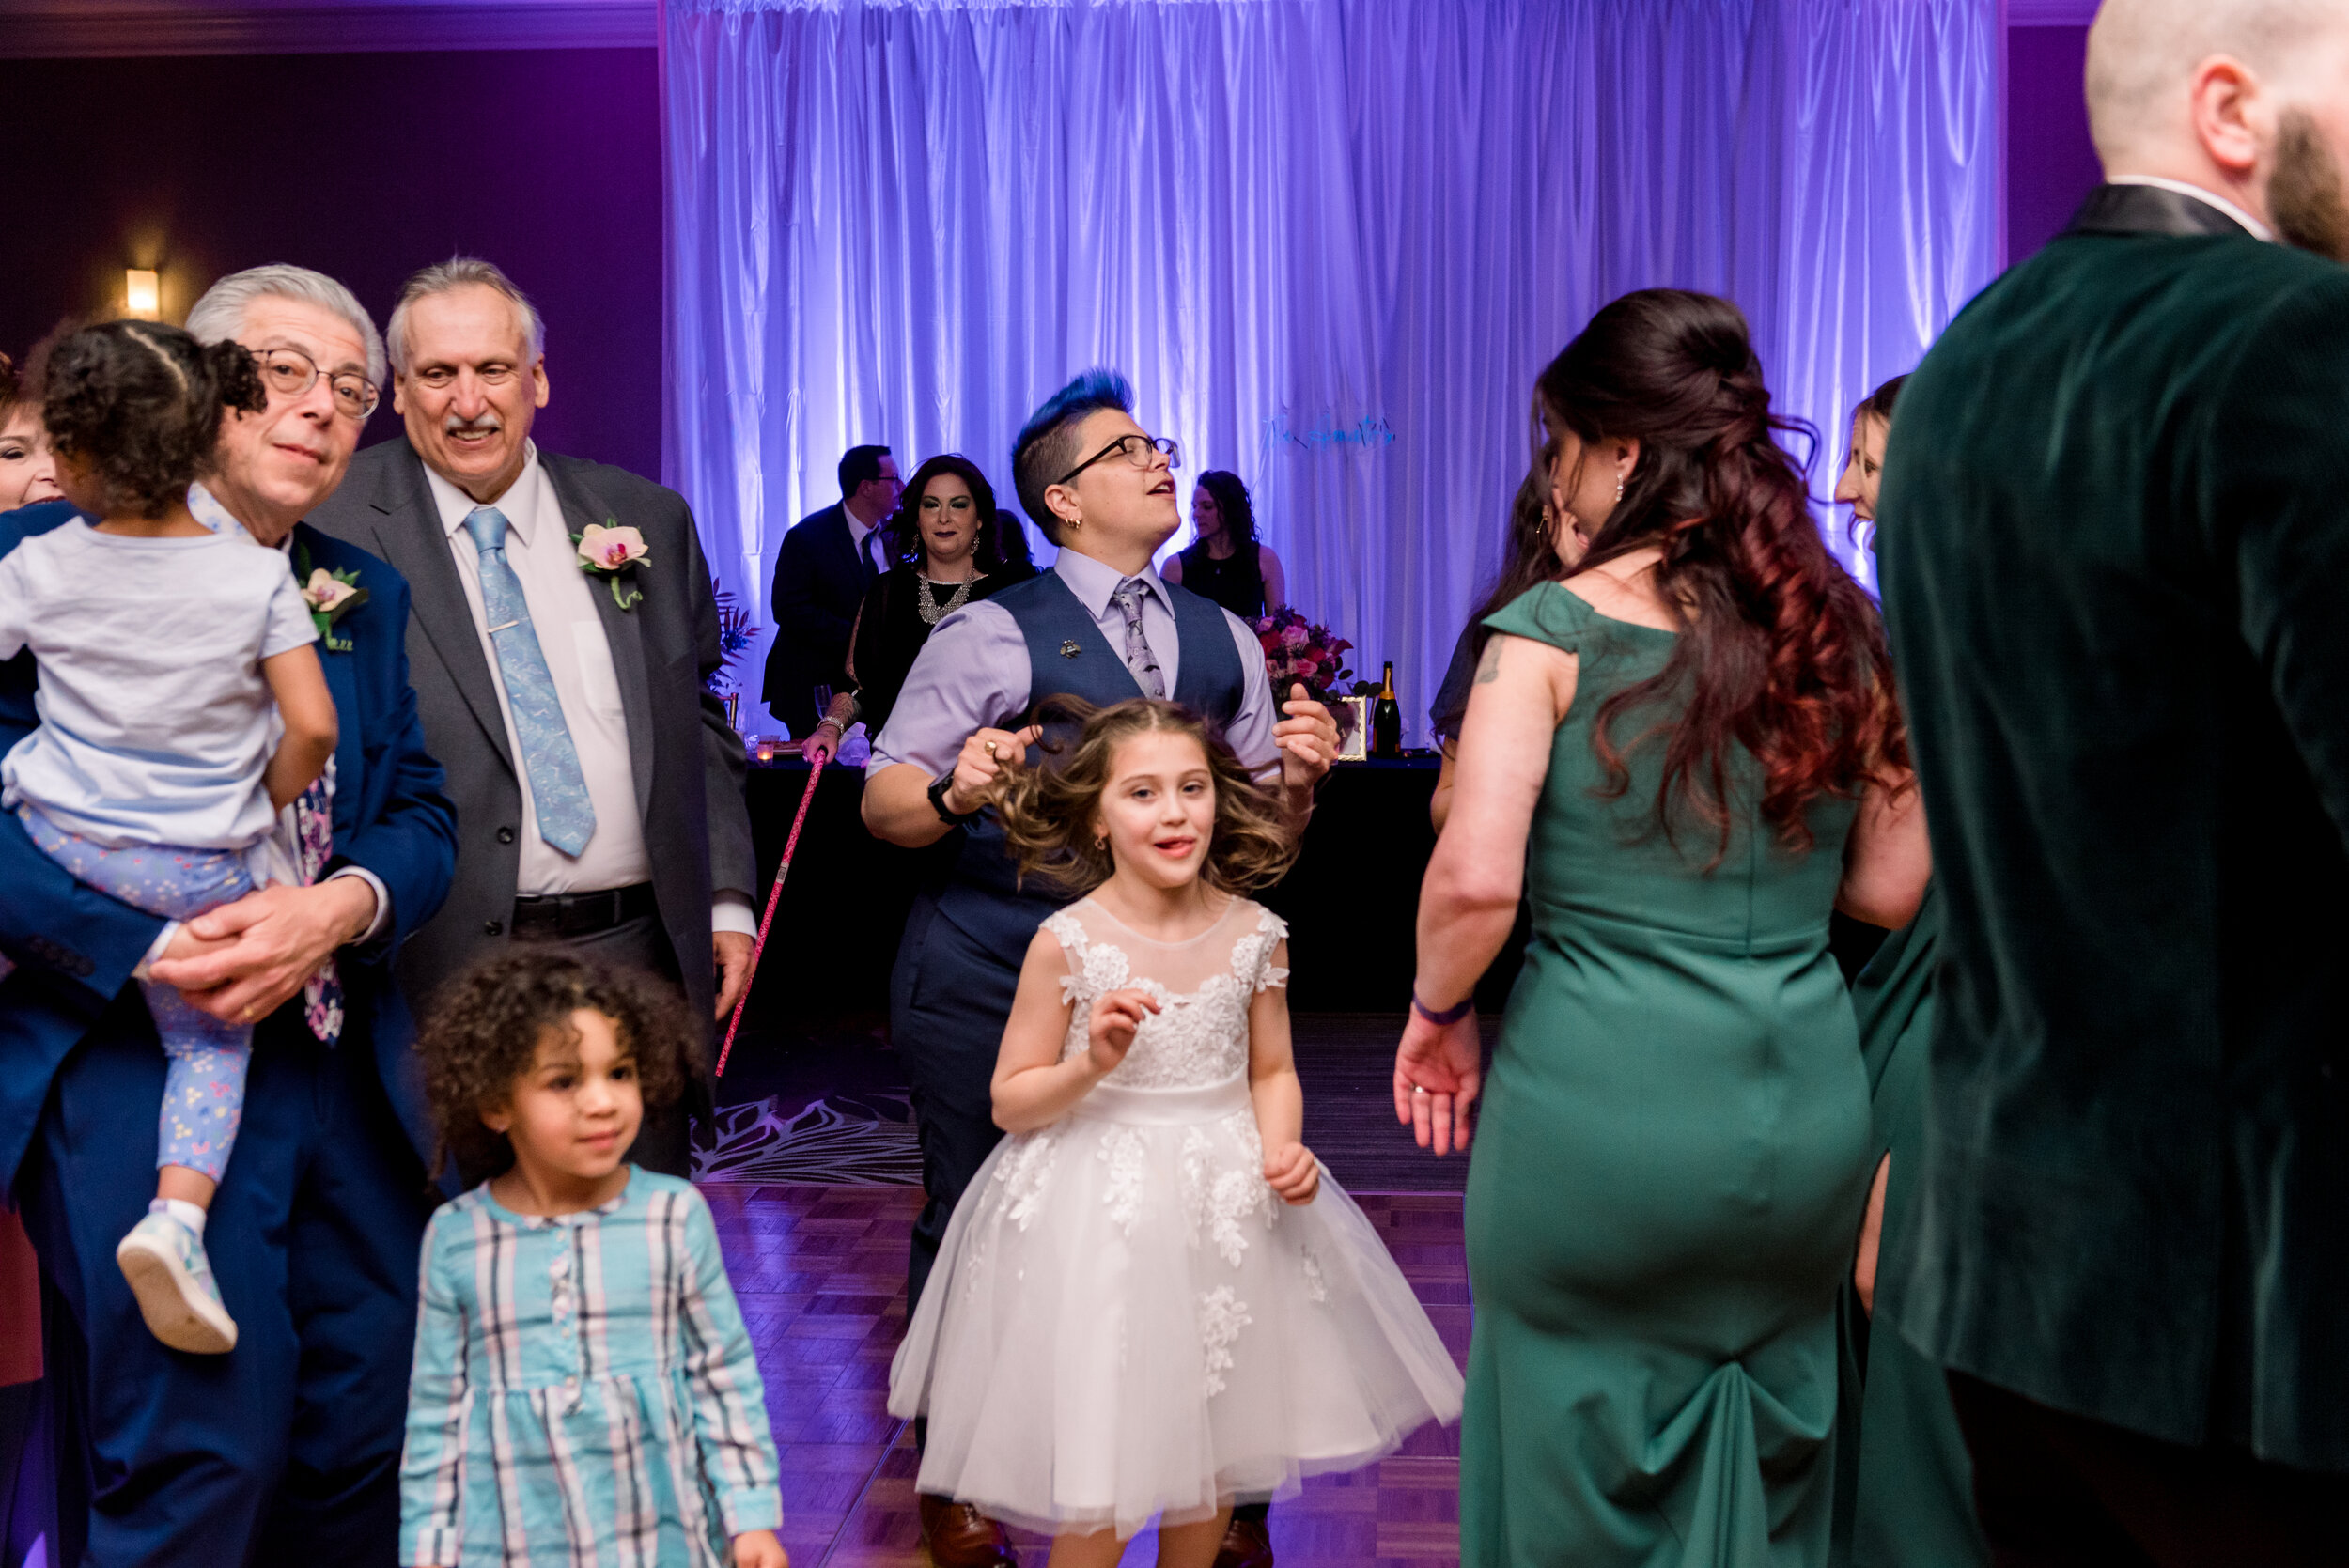 Weddings-at-The-DoubleTree-by-Hilton-Hotel-Pittsburgh-Ashley-Reed-Photography-98.jpg